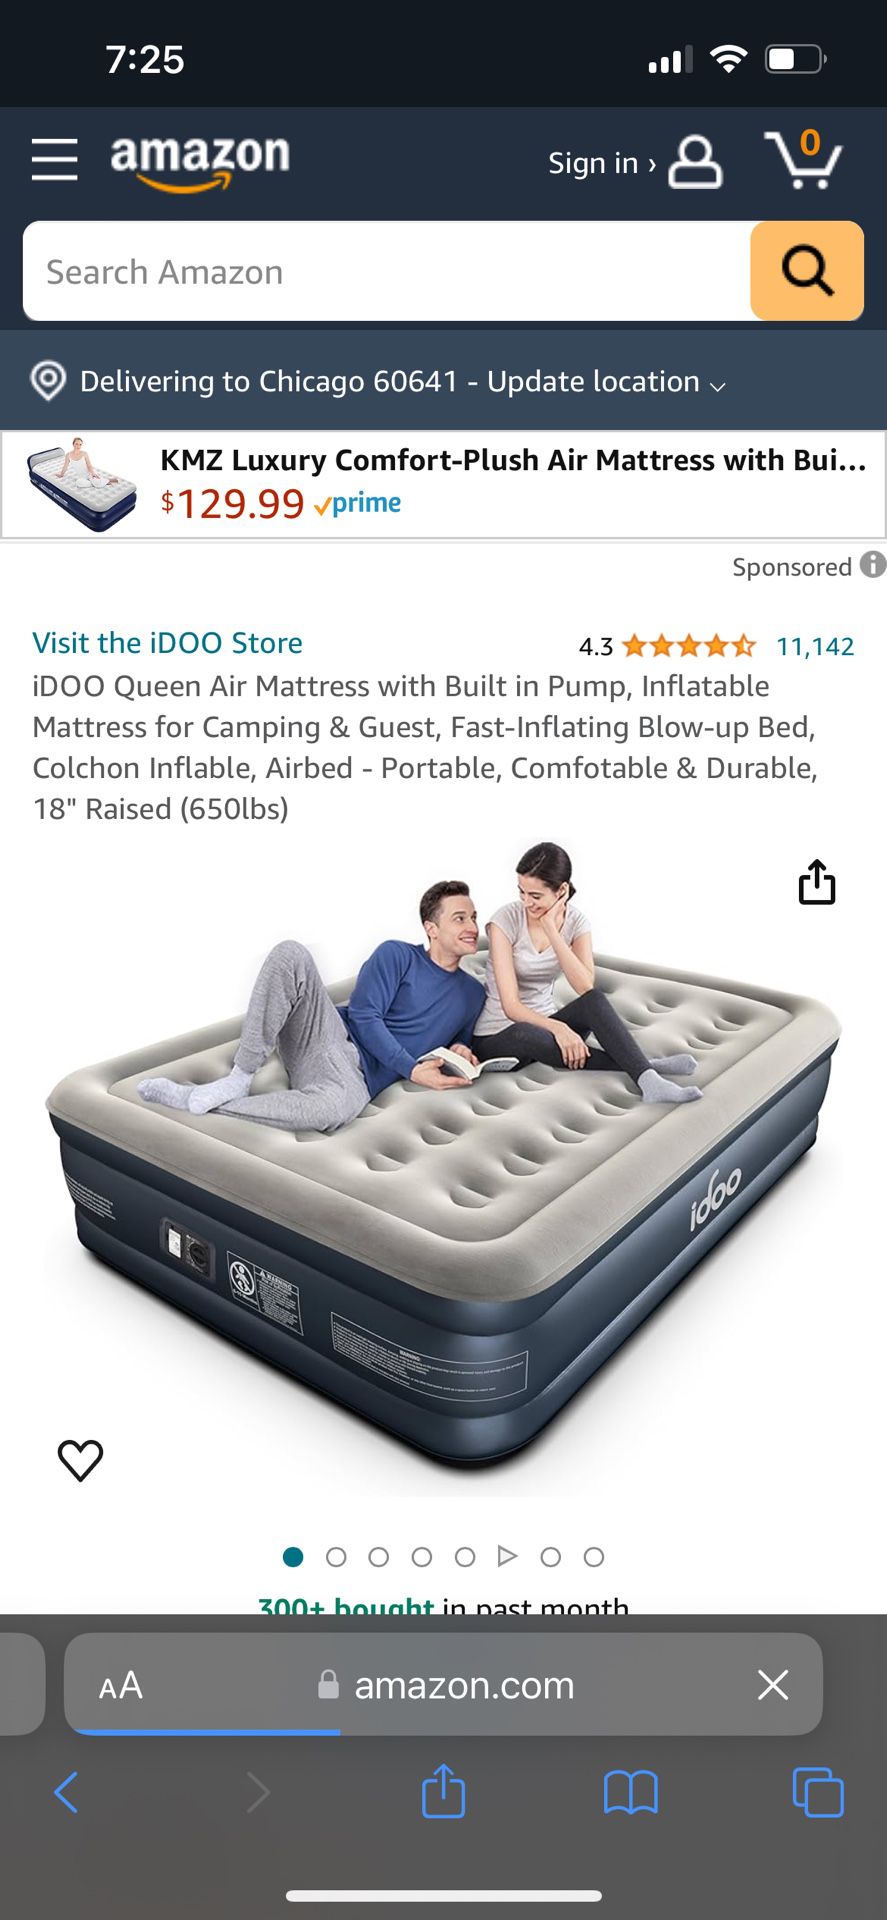 Idoo Queen Air Mattress With Built In Pump, Inflatable Mattress For Camping & Guest, Fast-Inflating Blow-Up Bed, Colchon Inflable, Airbed - Portable, 